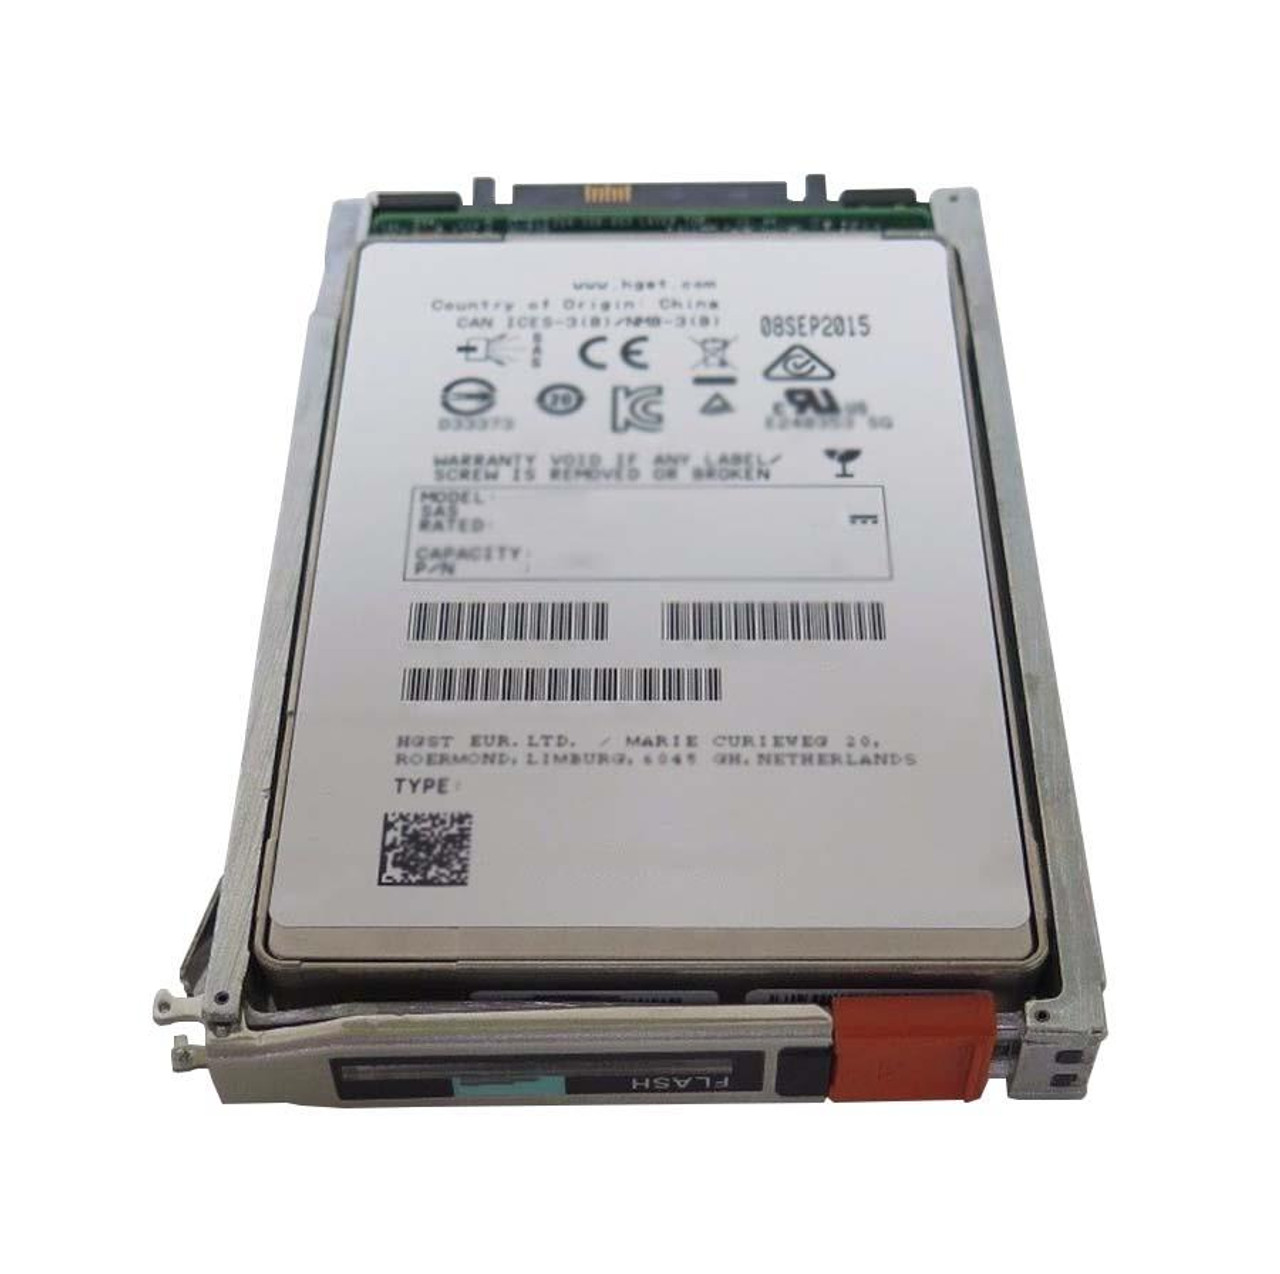 VNXF-2S6FX-1600HS EMC 1.6TB High Speed 2.5-inch Internal Solid State Drive (SSD) for VNX-F